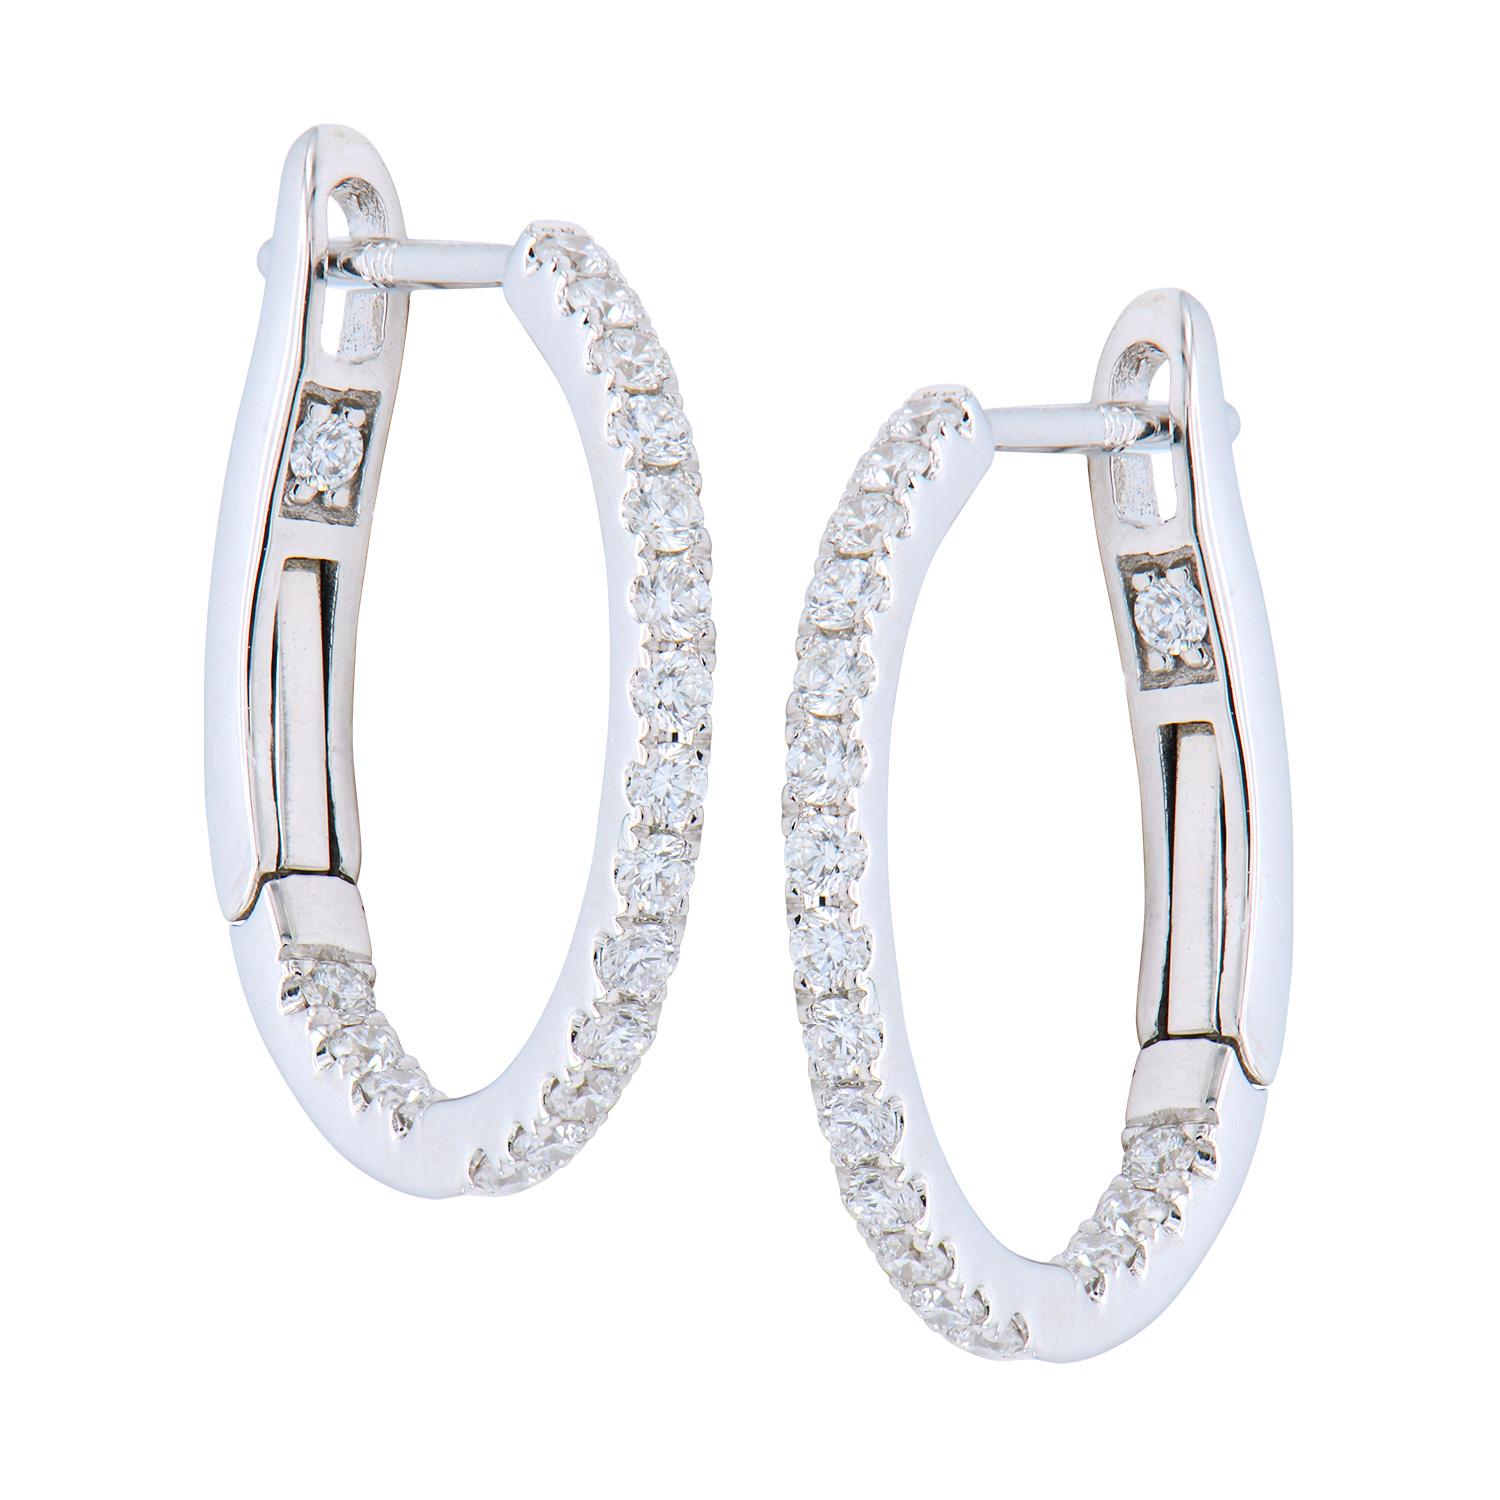 These classic huggies are made from 2.3 grams of 14 karat white gold. They contain 38 round G-H color SI1 diamonds totaling 0.31 carats. They are the perfect classic earrings that can be worn all the time and will never go out of style. 